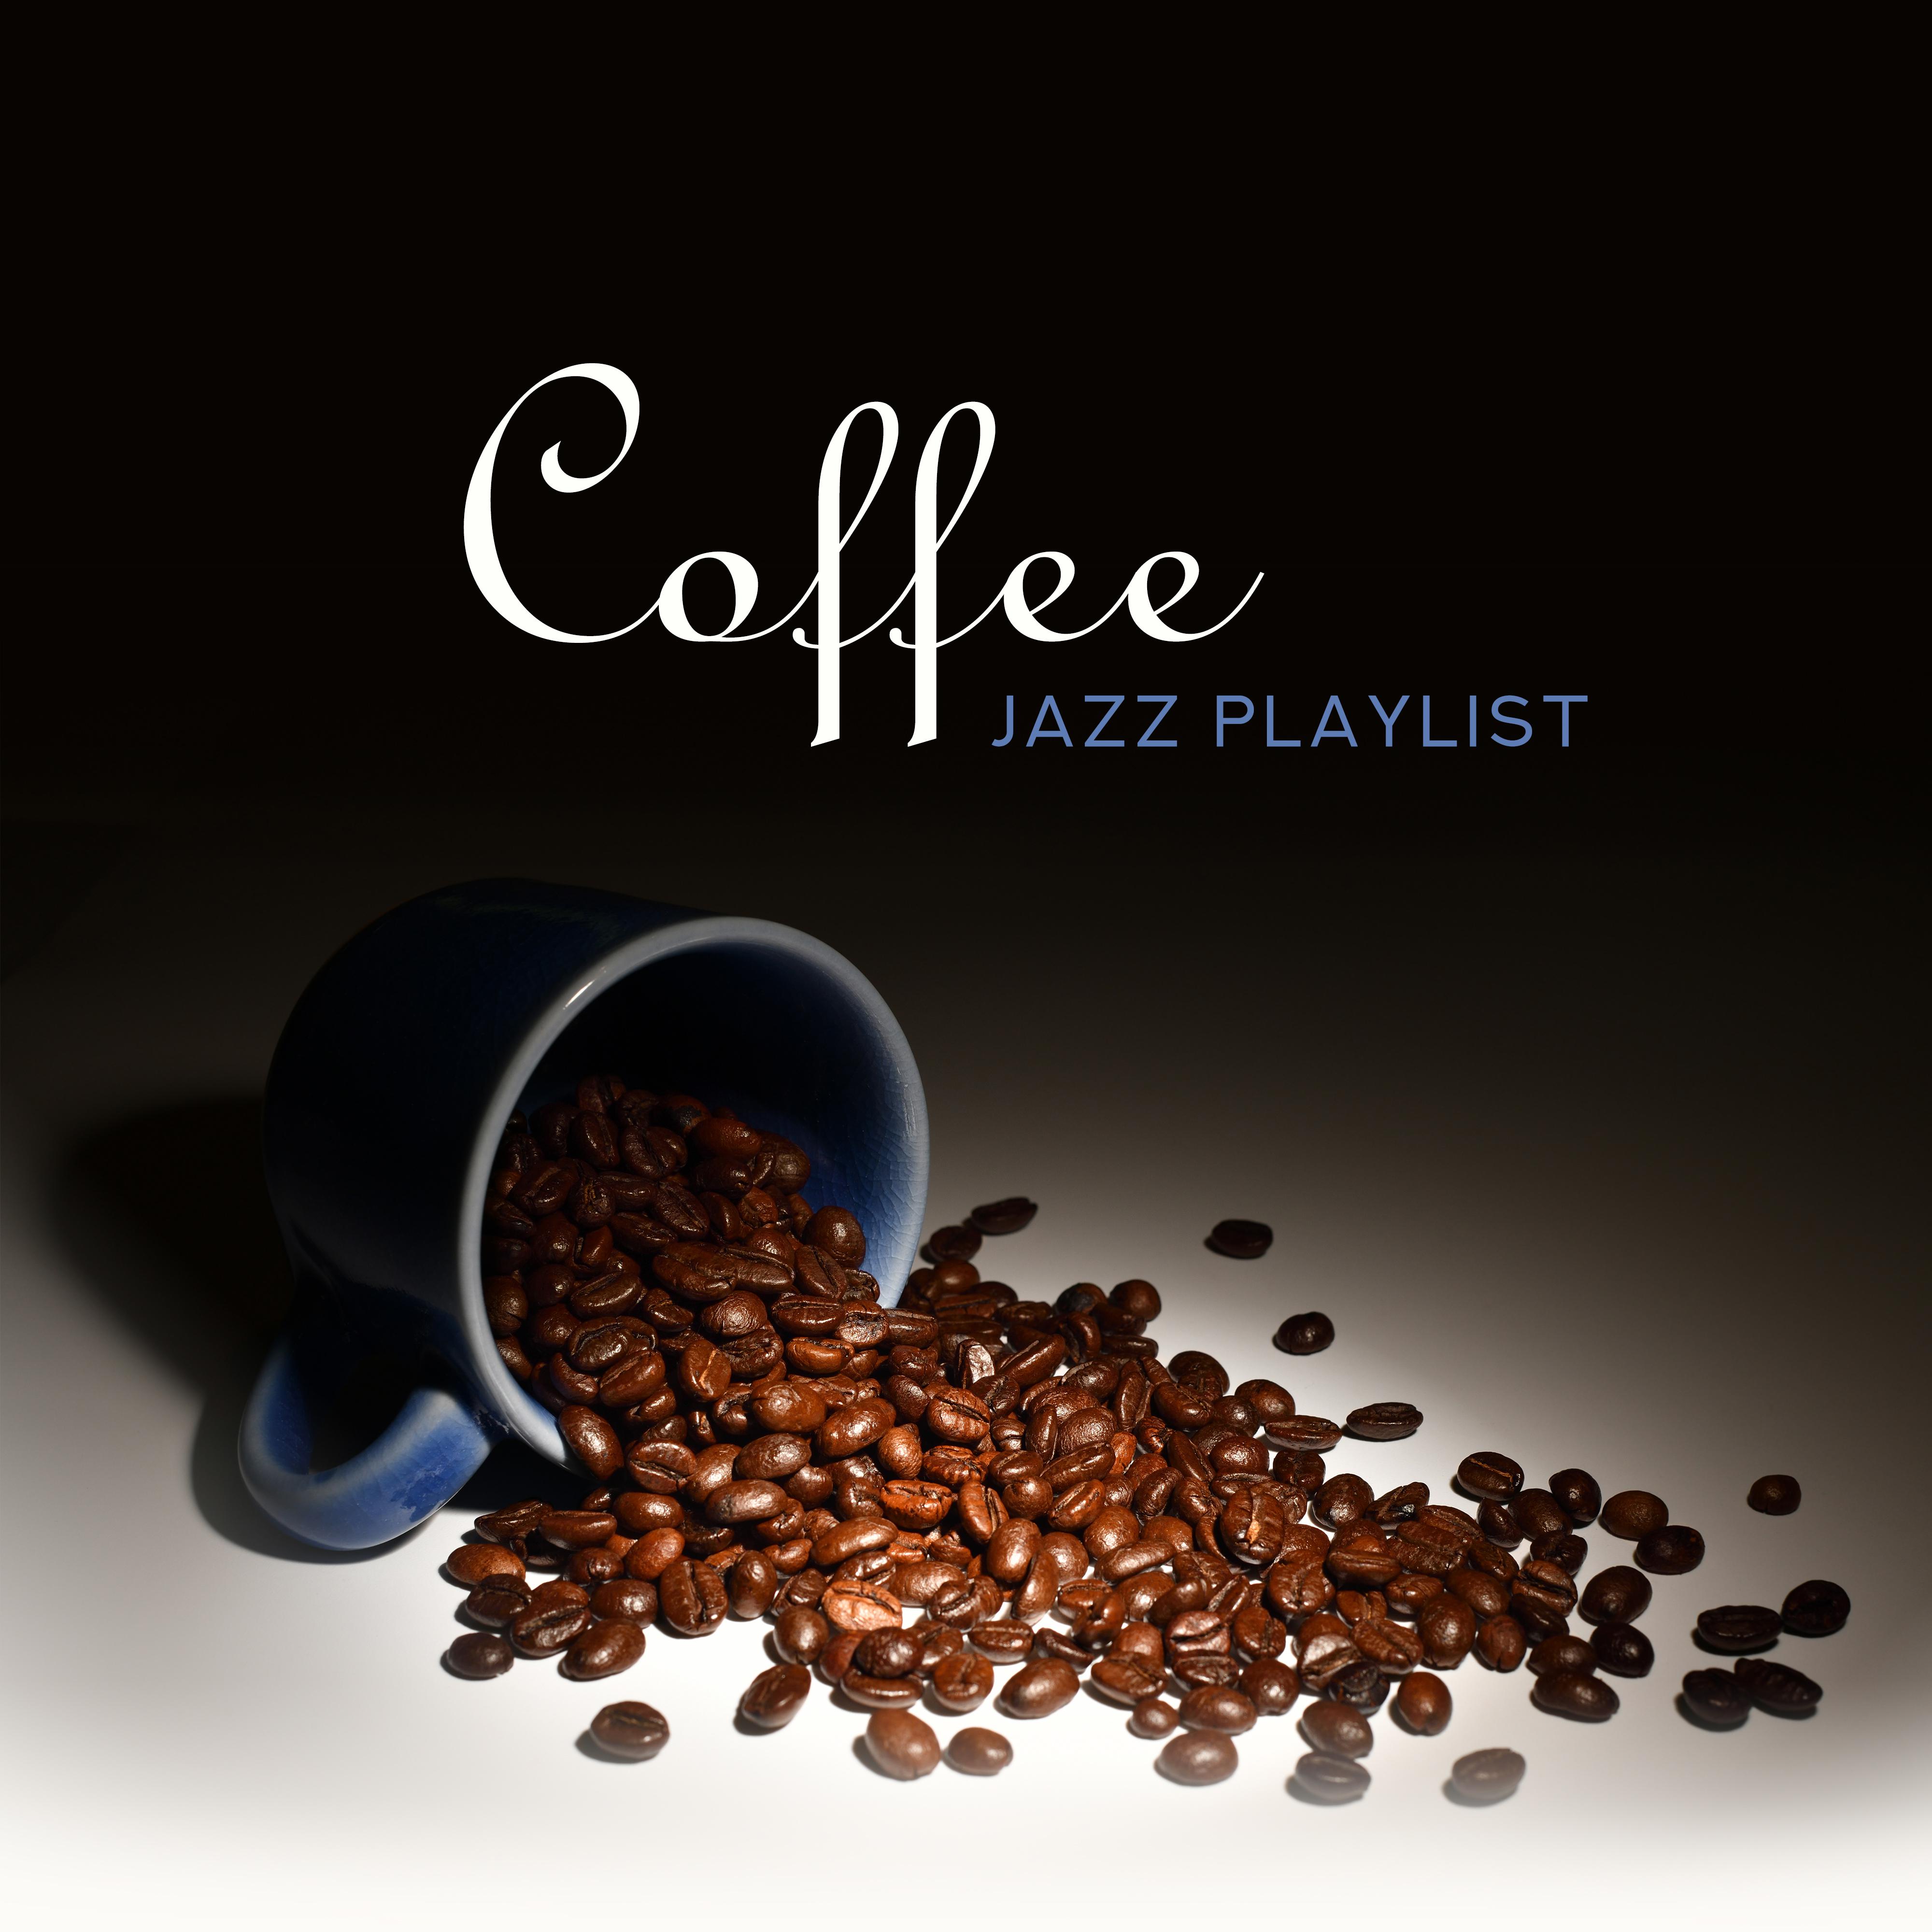 Coffee Jazz Playlist – Pure Jazz for Relaxation & Rest, Coffee Music, Instrumental Songs for Restaurant, Jazz Music Ambient